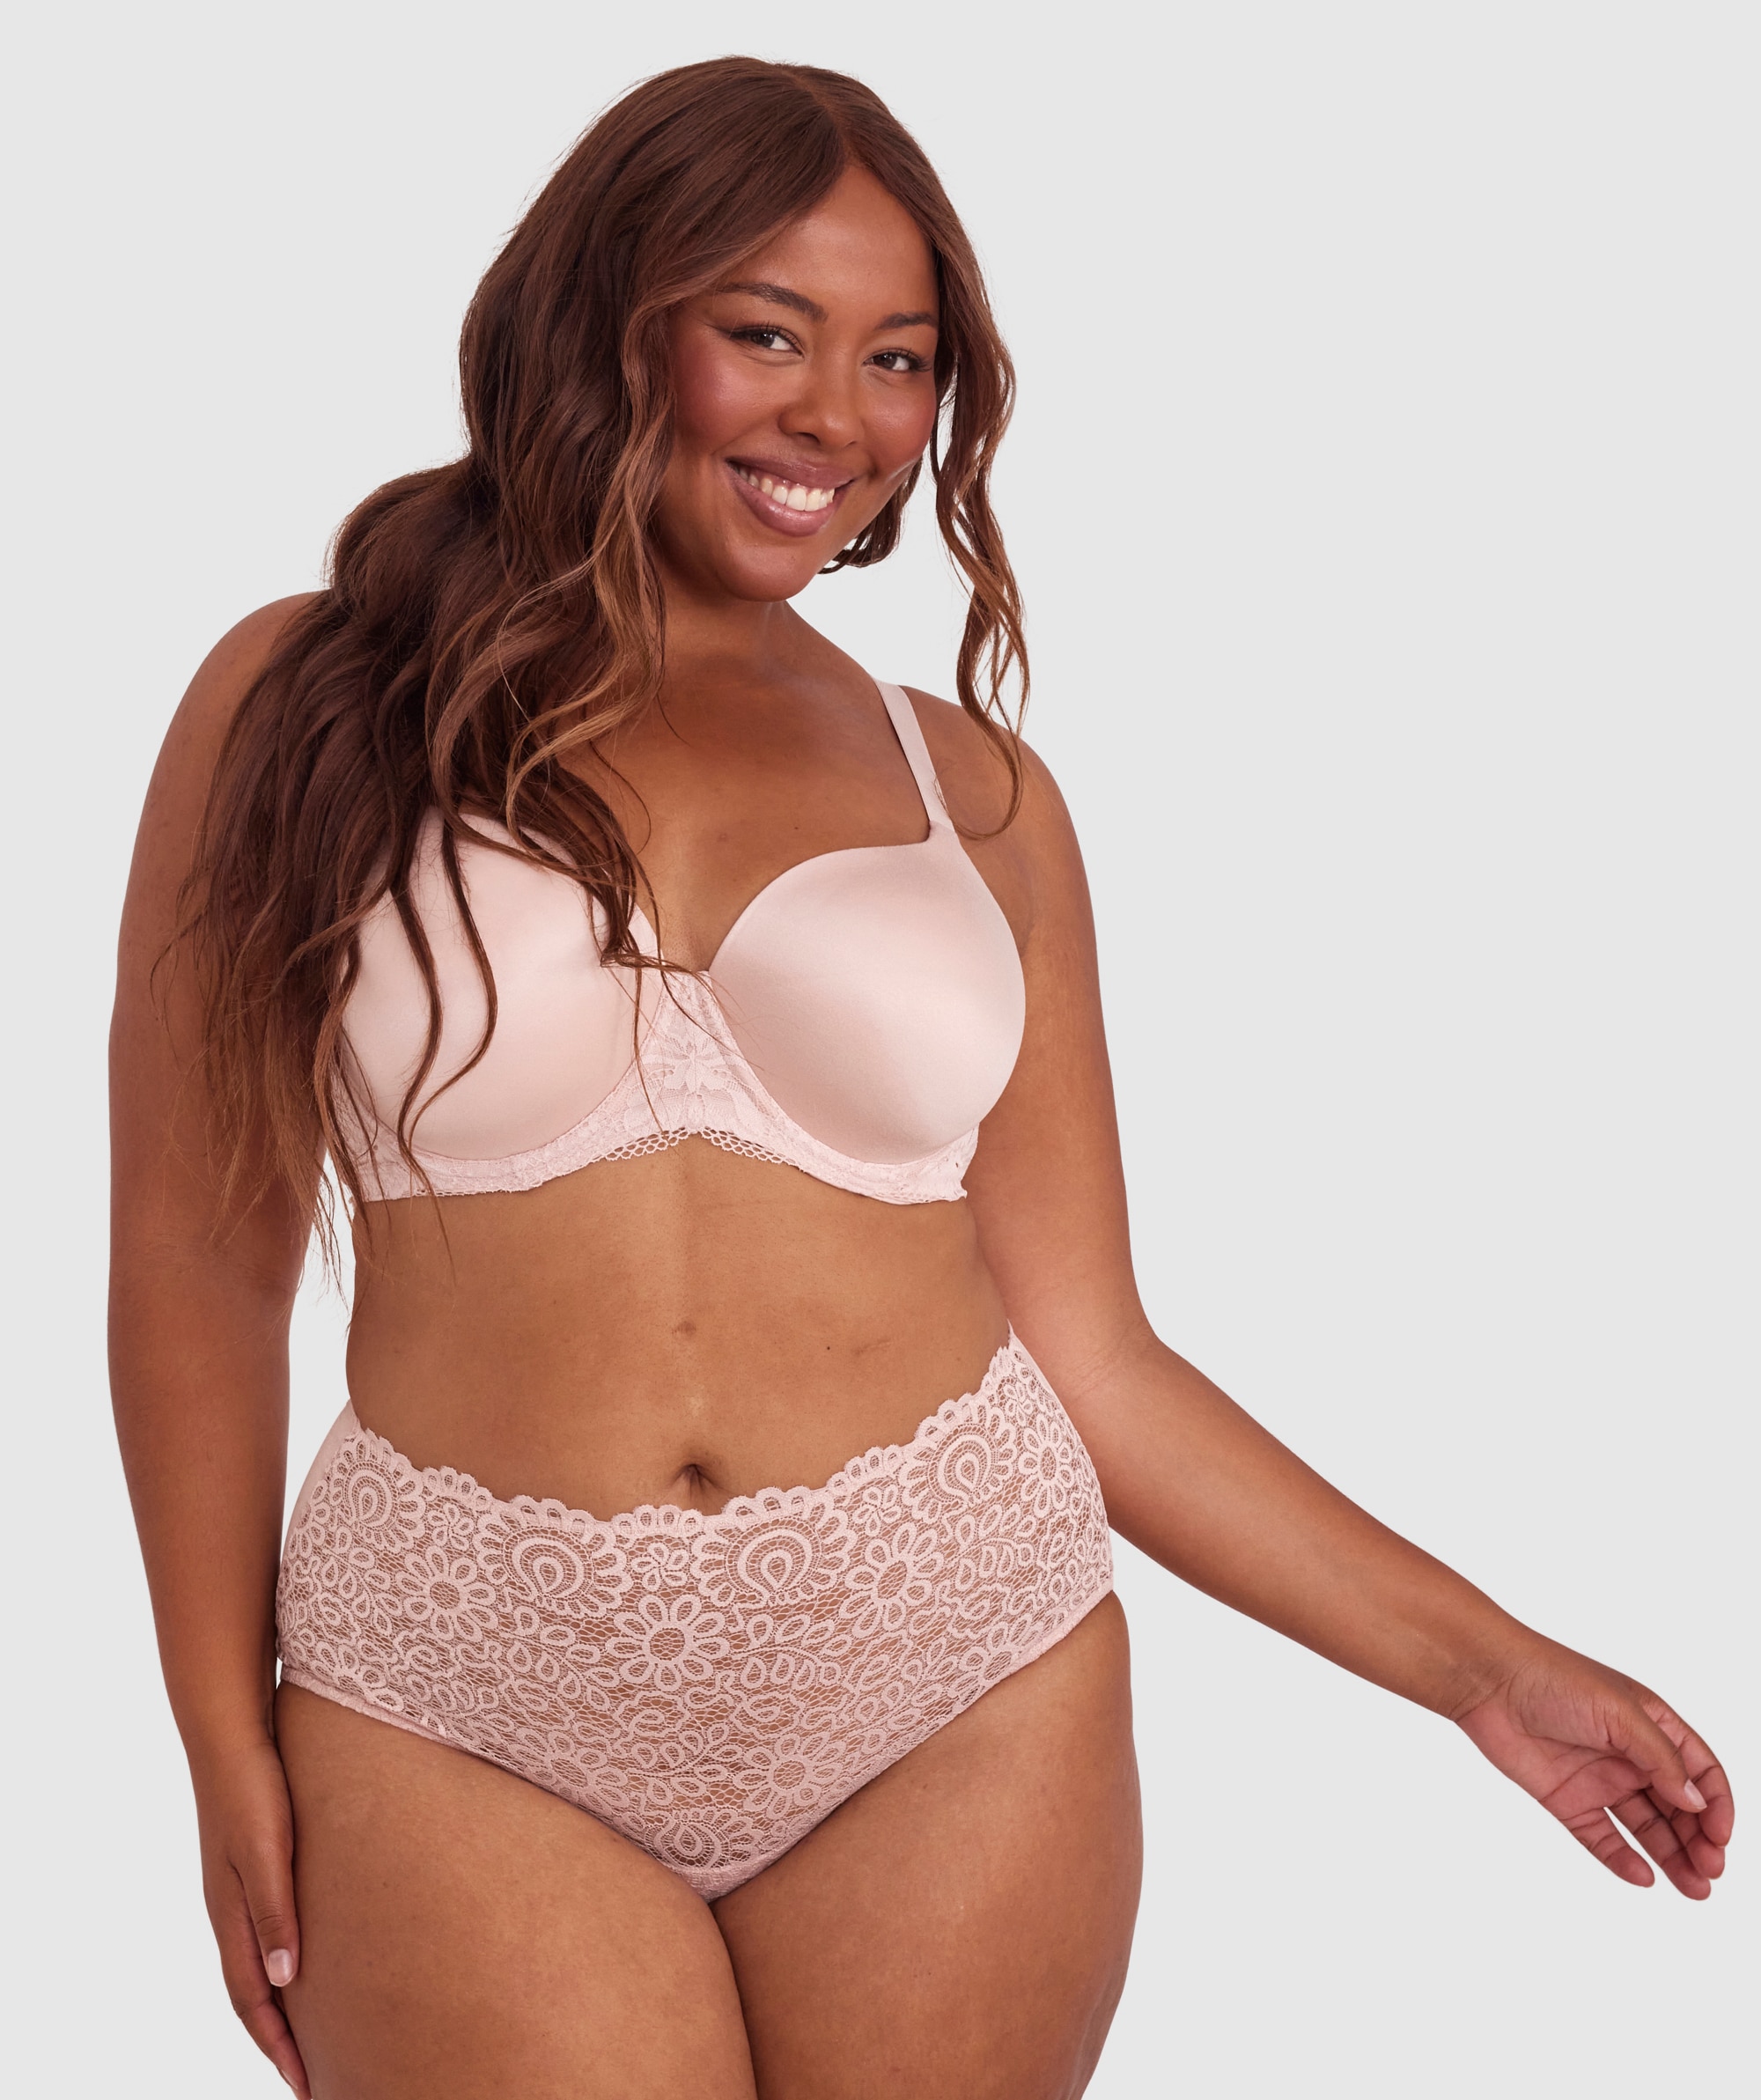 Body Bliss Lace 2nd Gen Full Cup Bra - Blush Pink